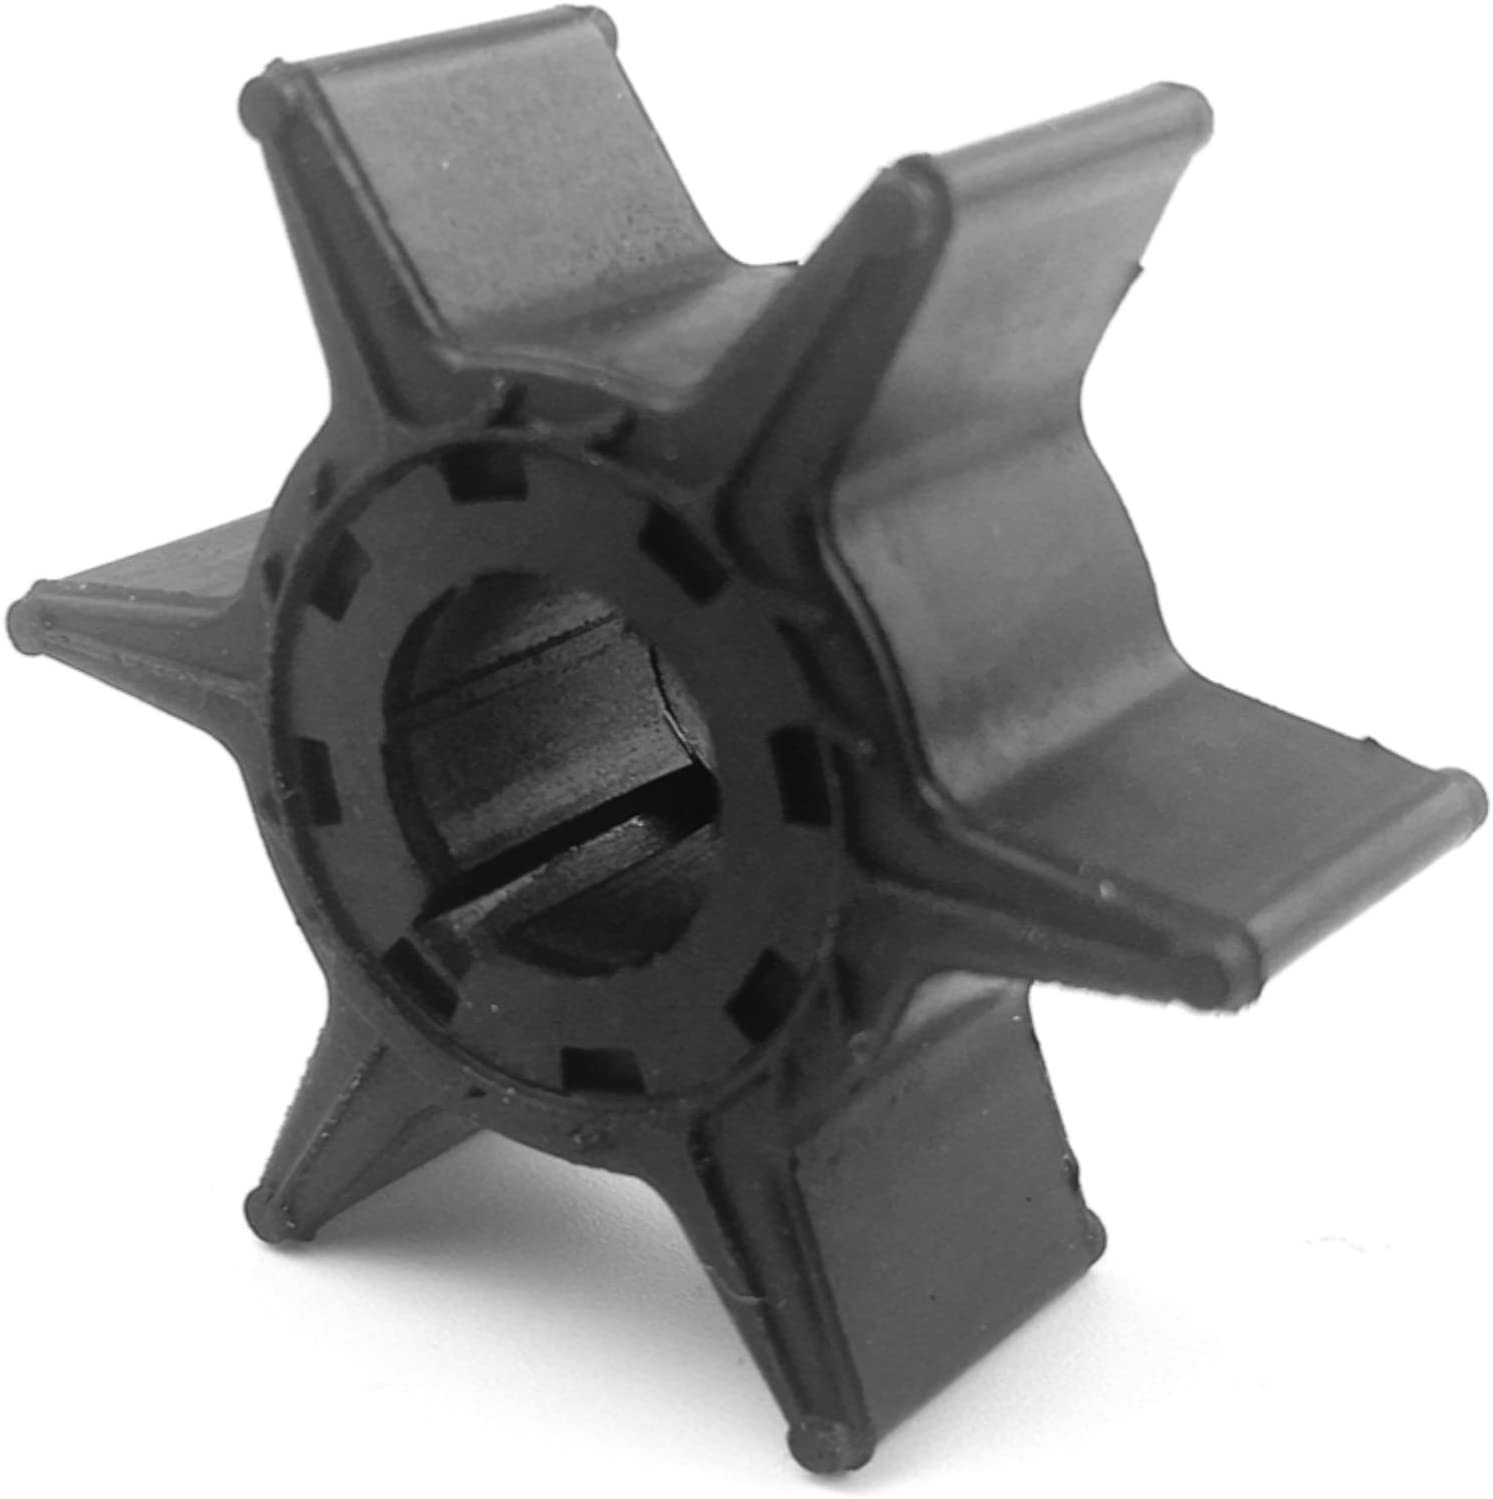 Boat Engine Water Pump Impeller 6L2-44352-00 18-3065 for Yamaha 2-stroke 20hp 25hp Outboard Mot